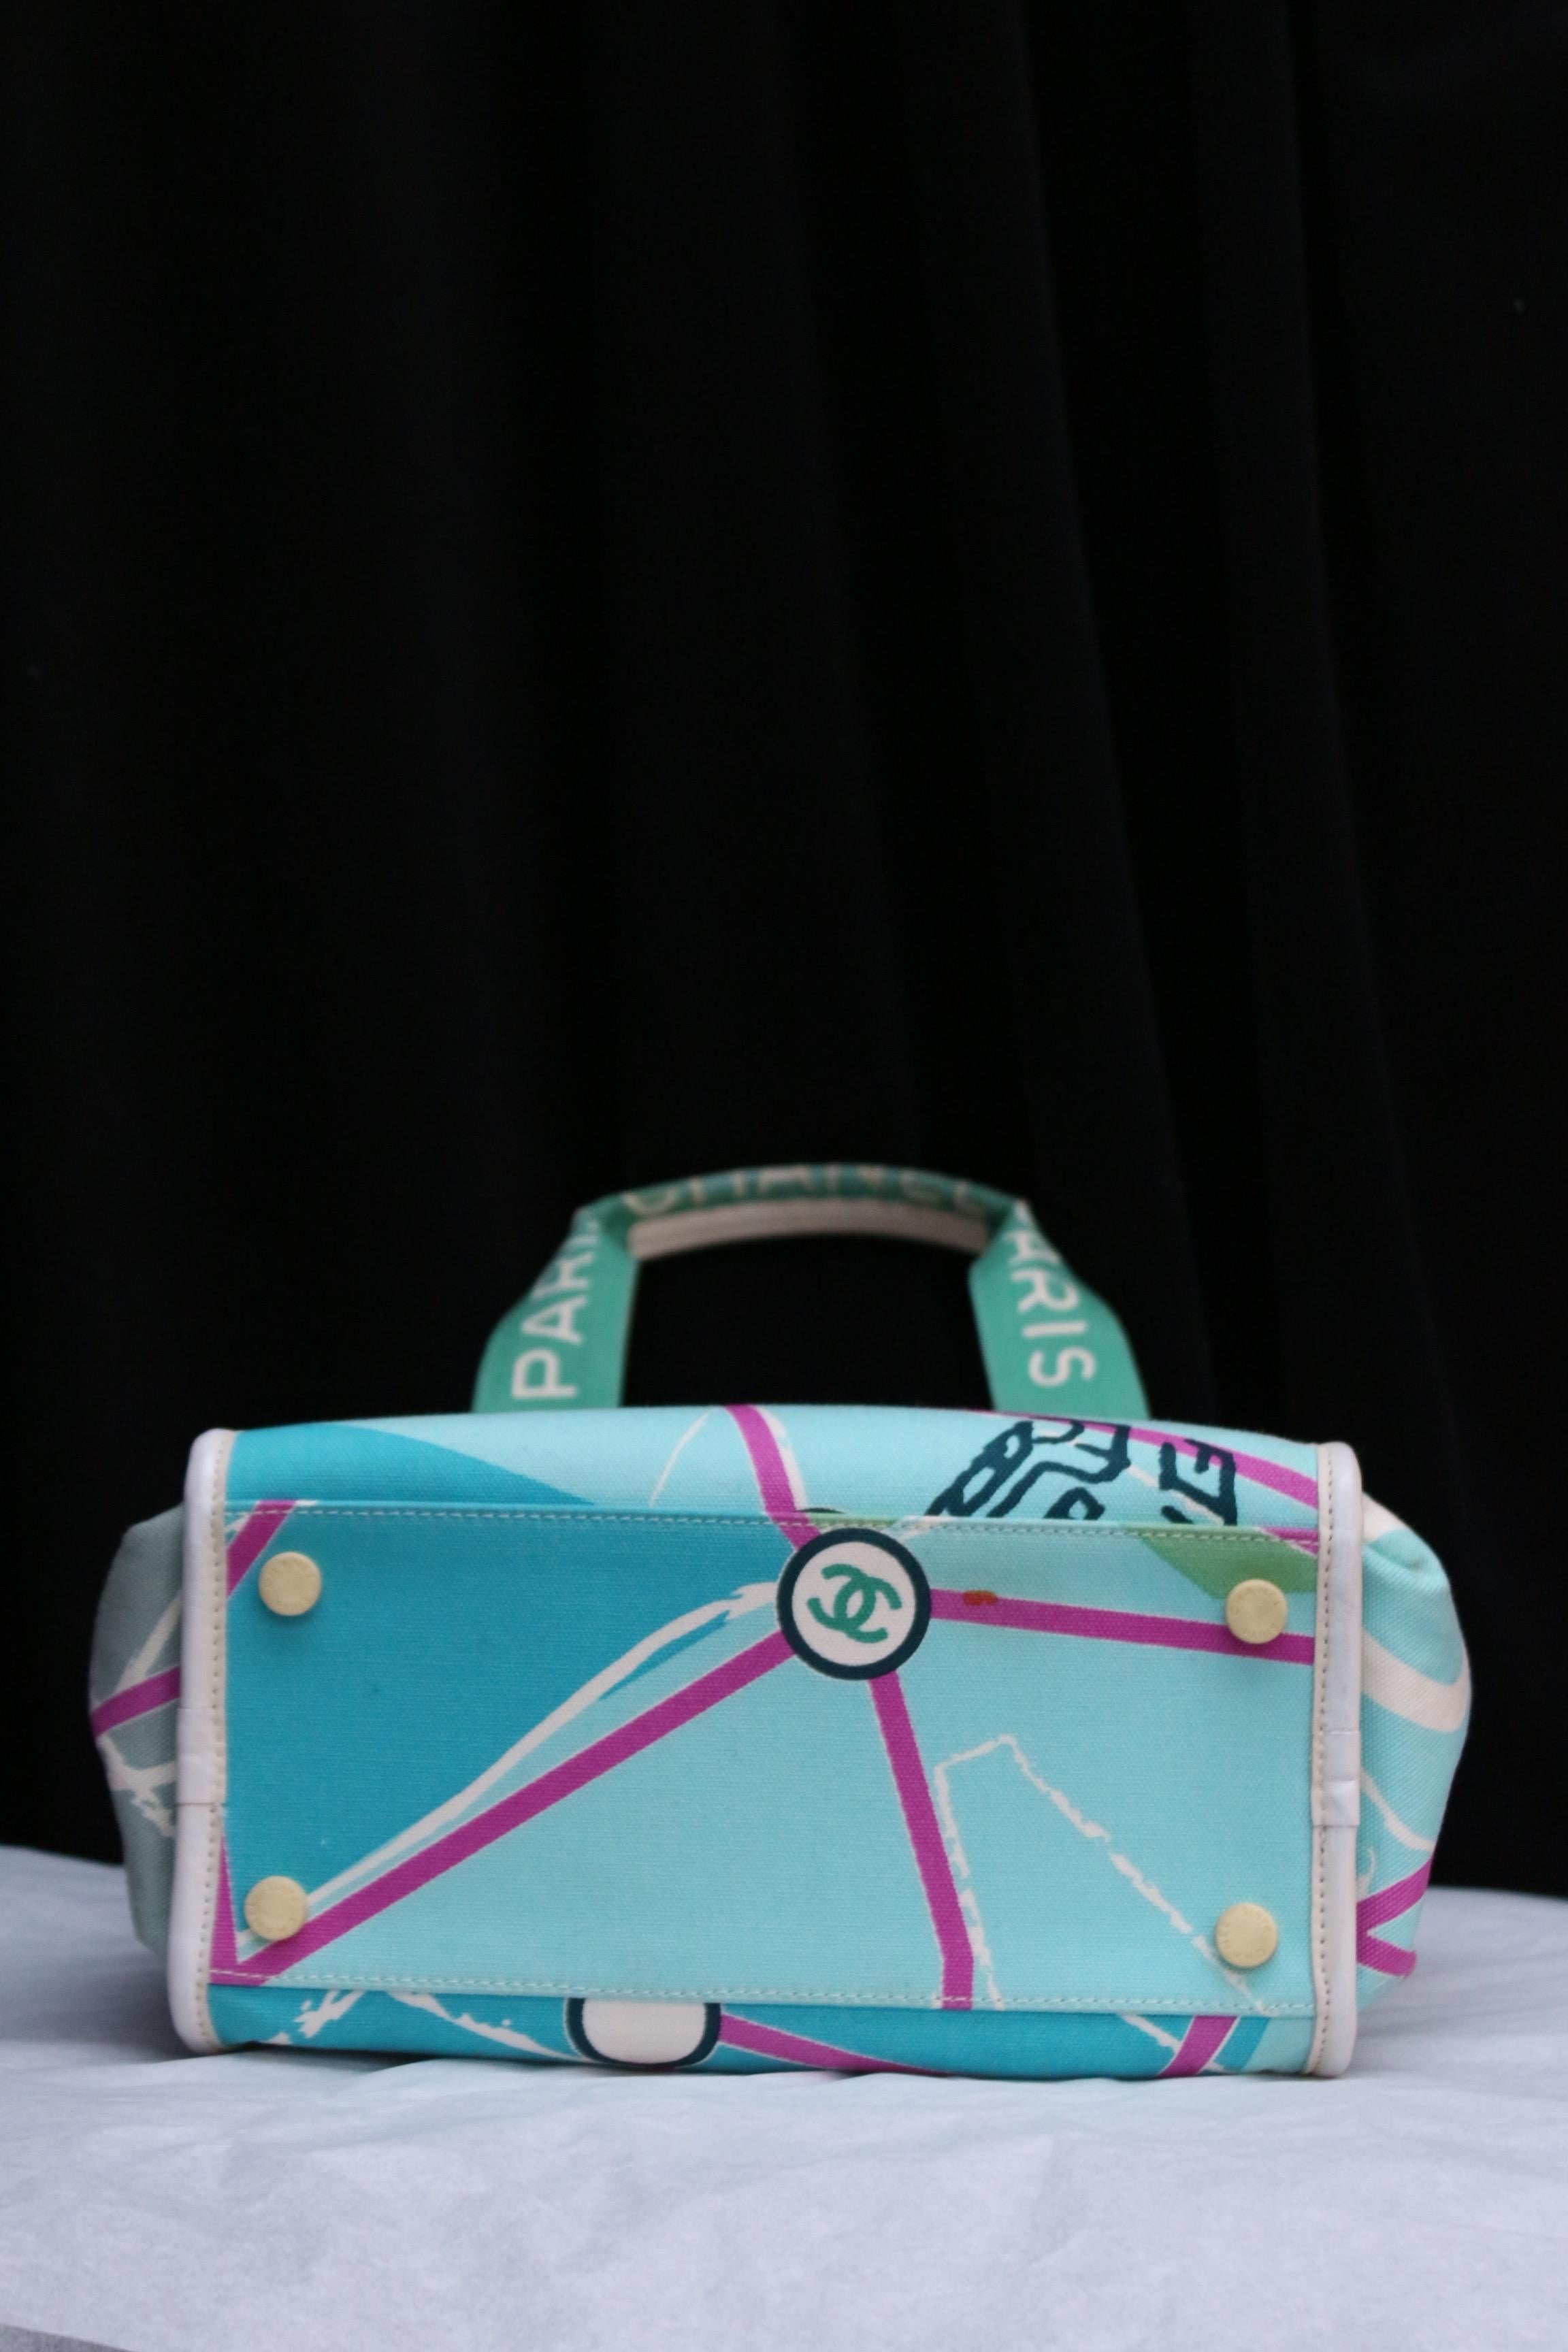 Women's Chanel lovely collector handbag in turquoise canvas, 2005